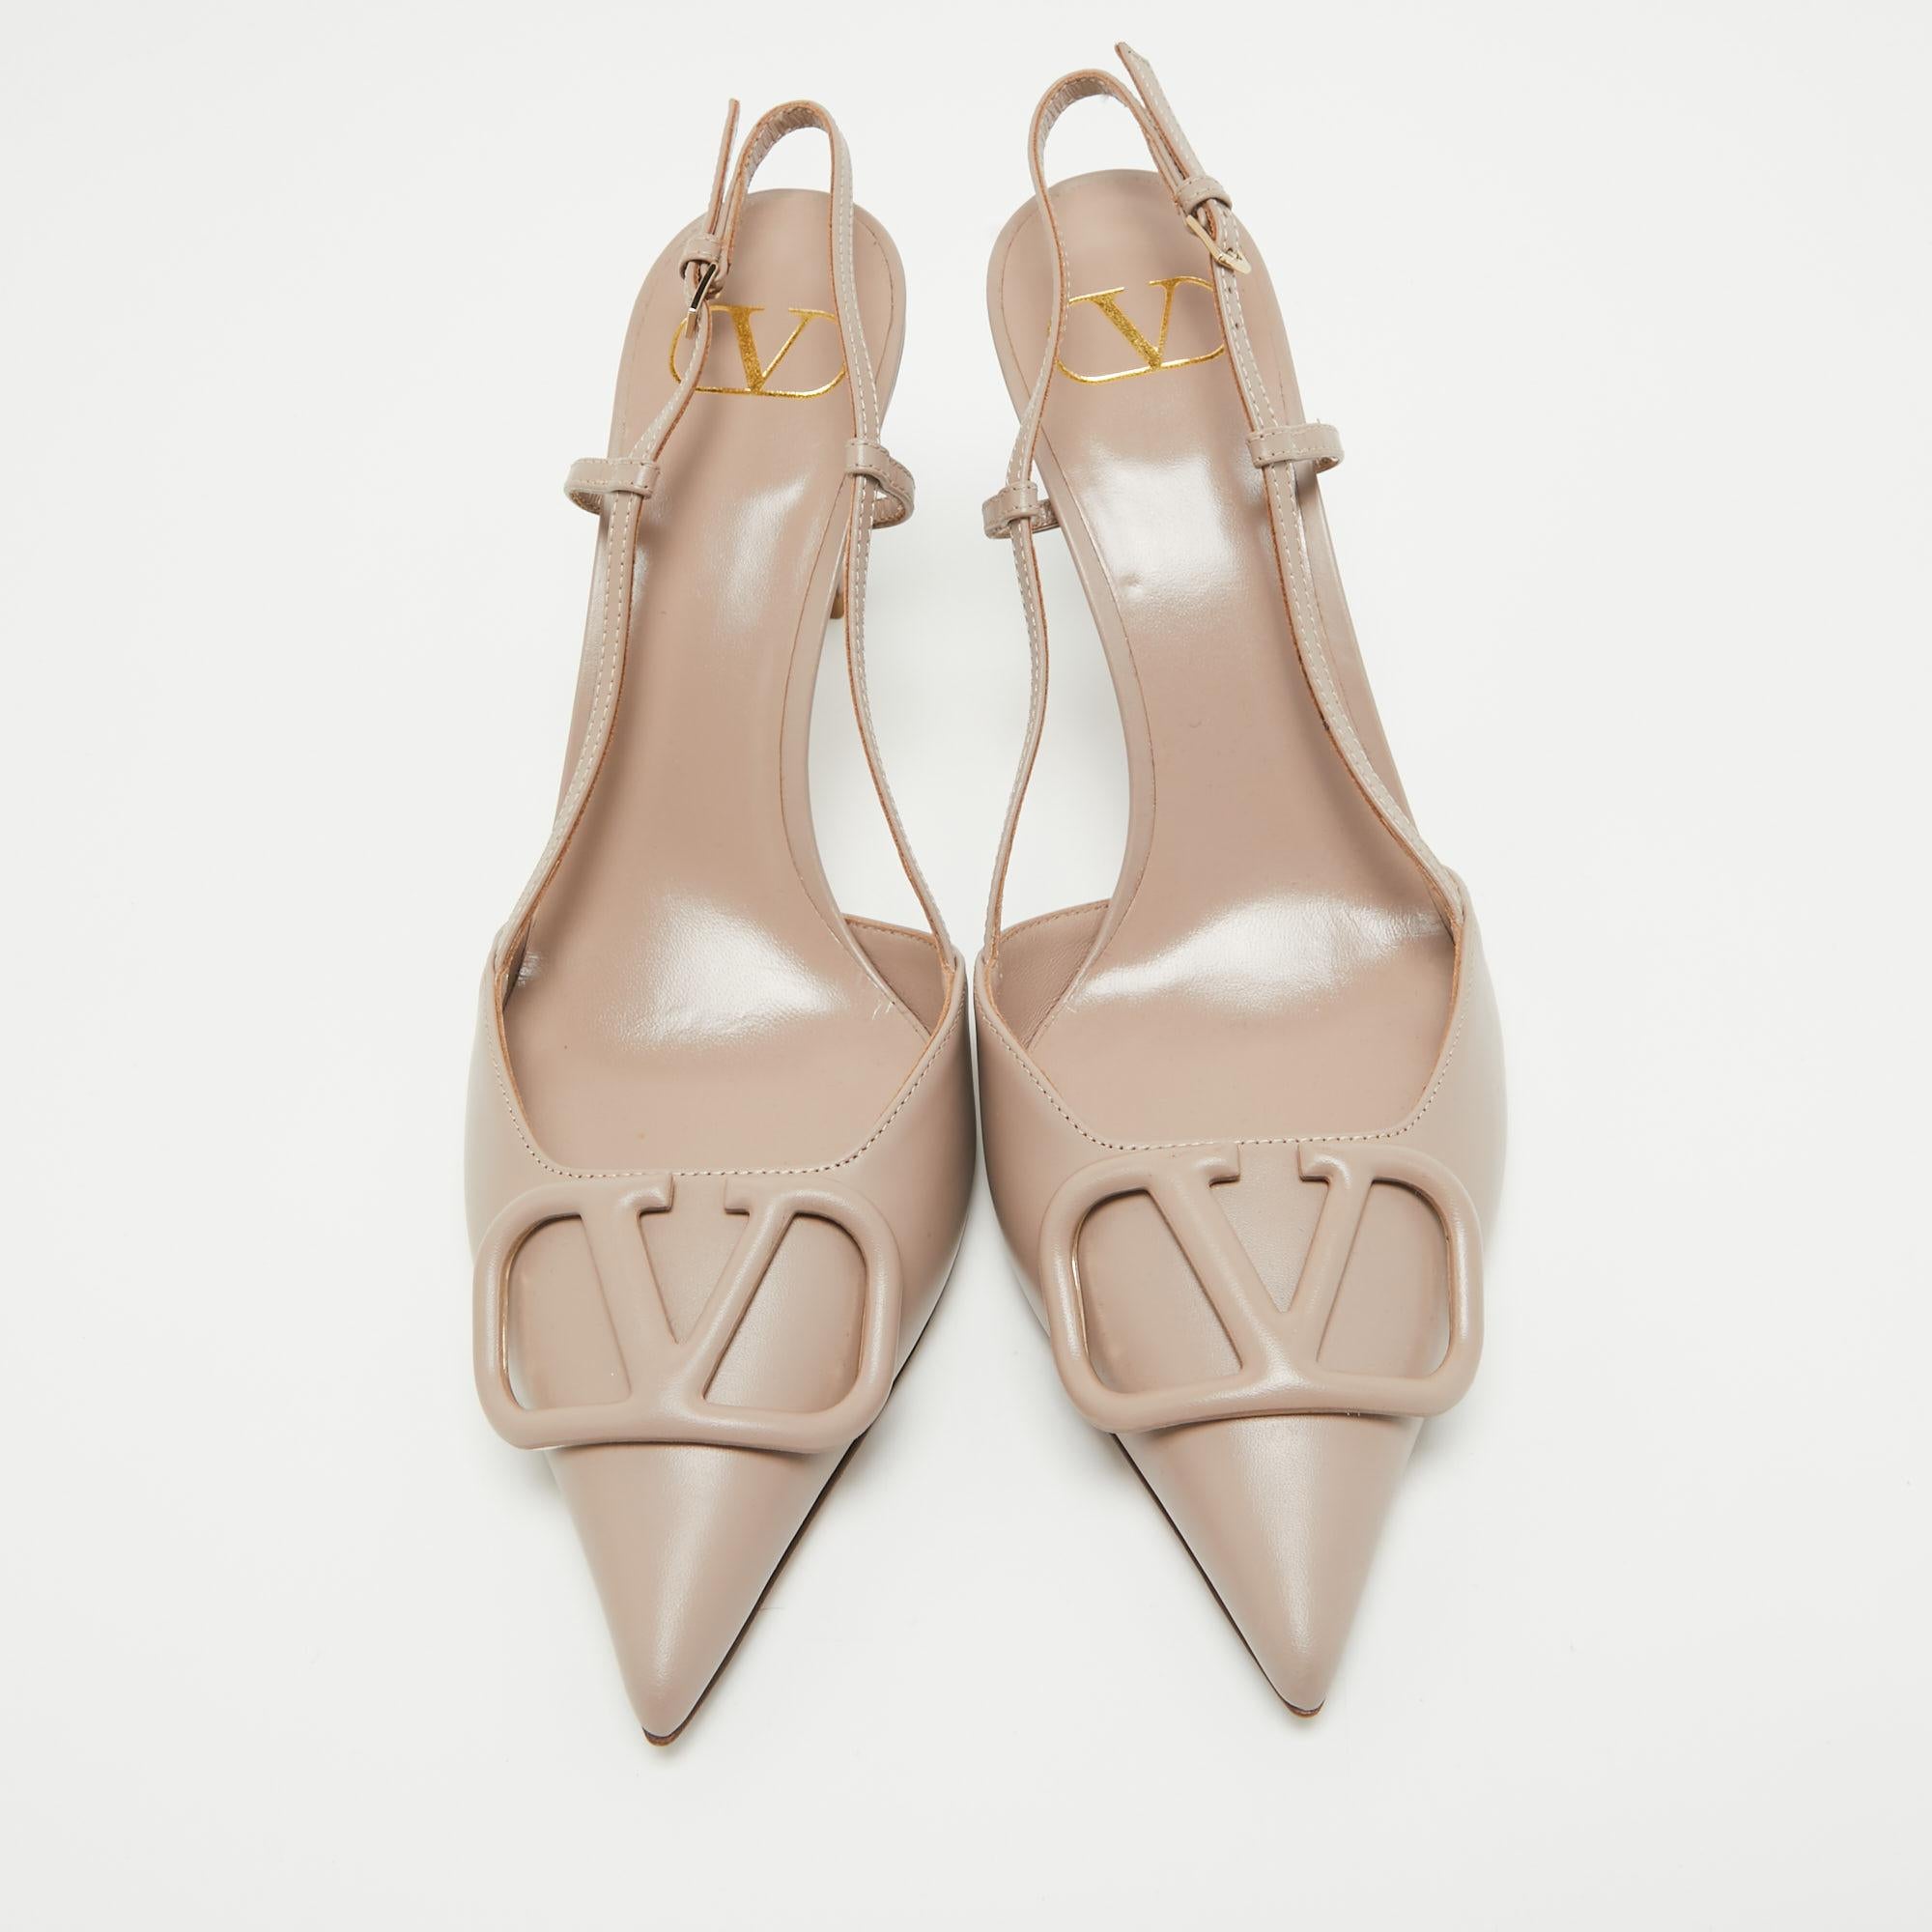 Discover footwear elegance with these Valentino women's pumps. Meticulously designed, these heels marry fashion and comfort, ensuring you shine in every setting.

